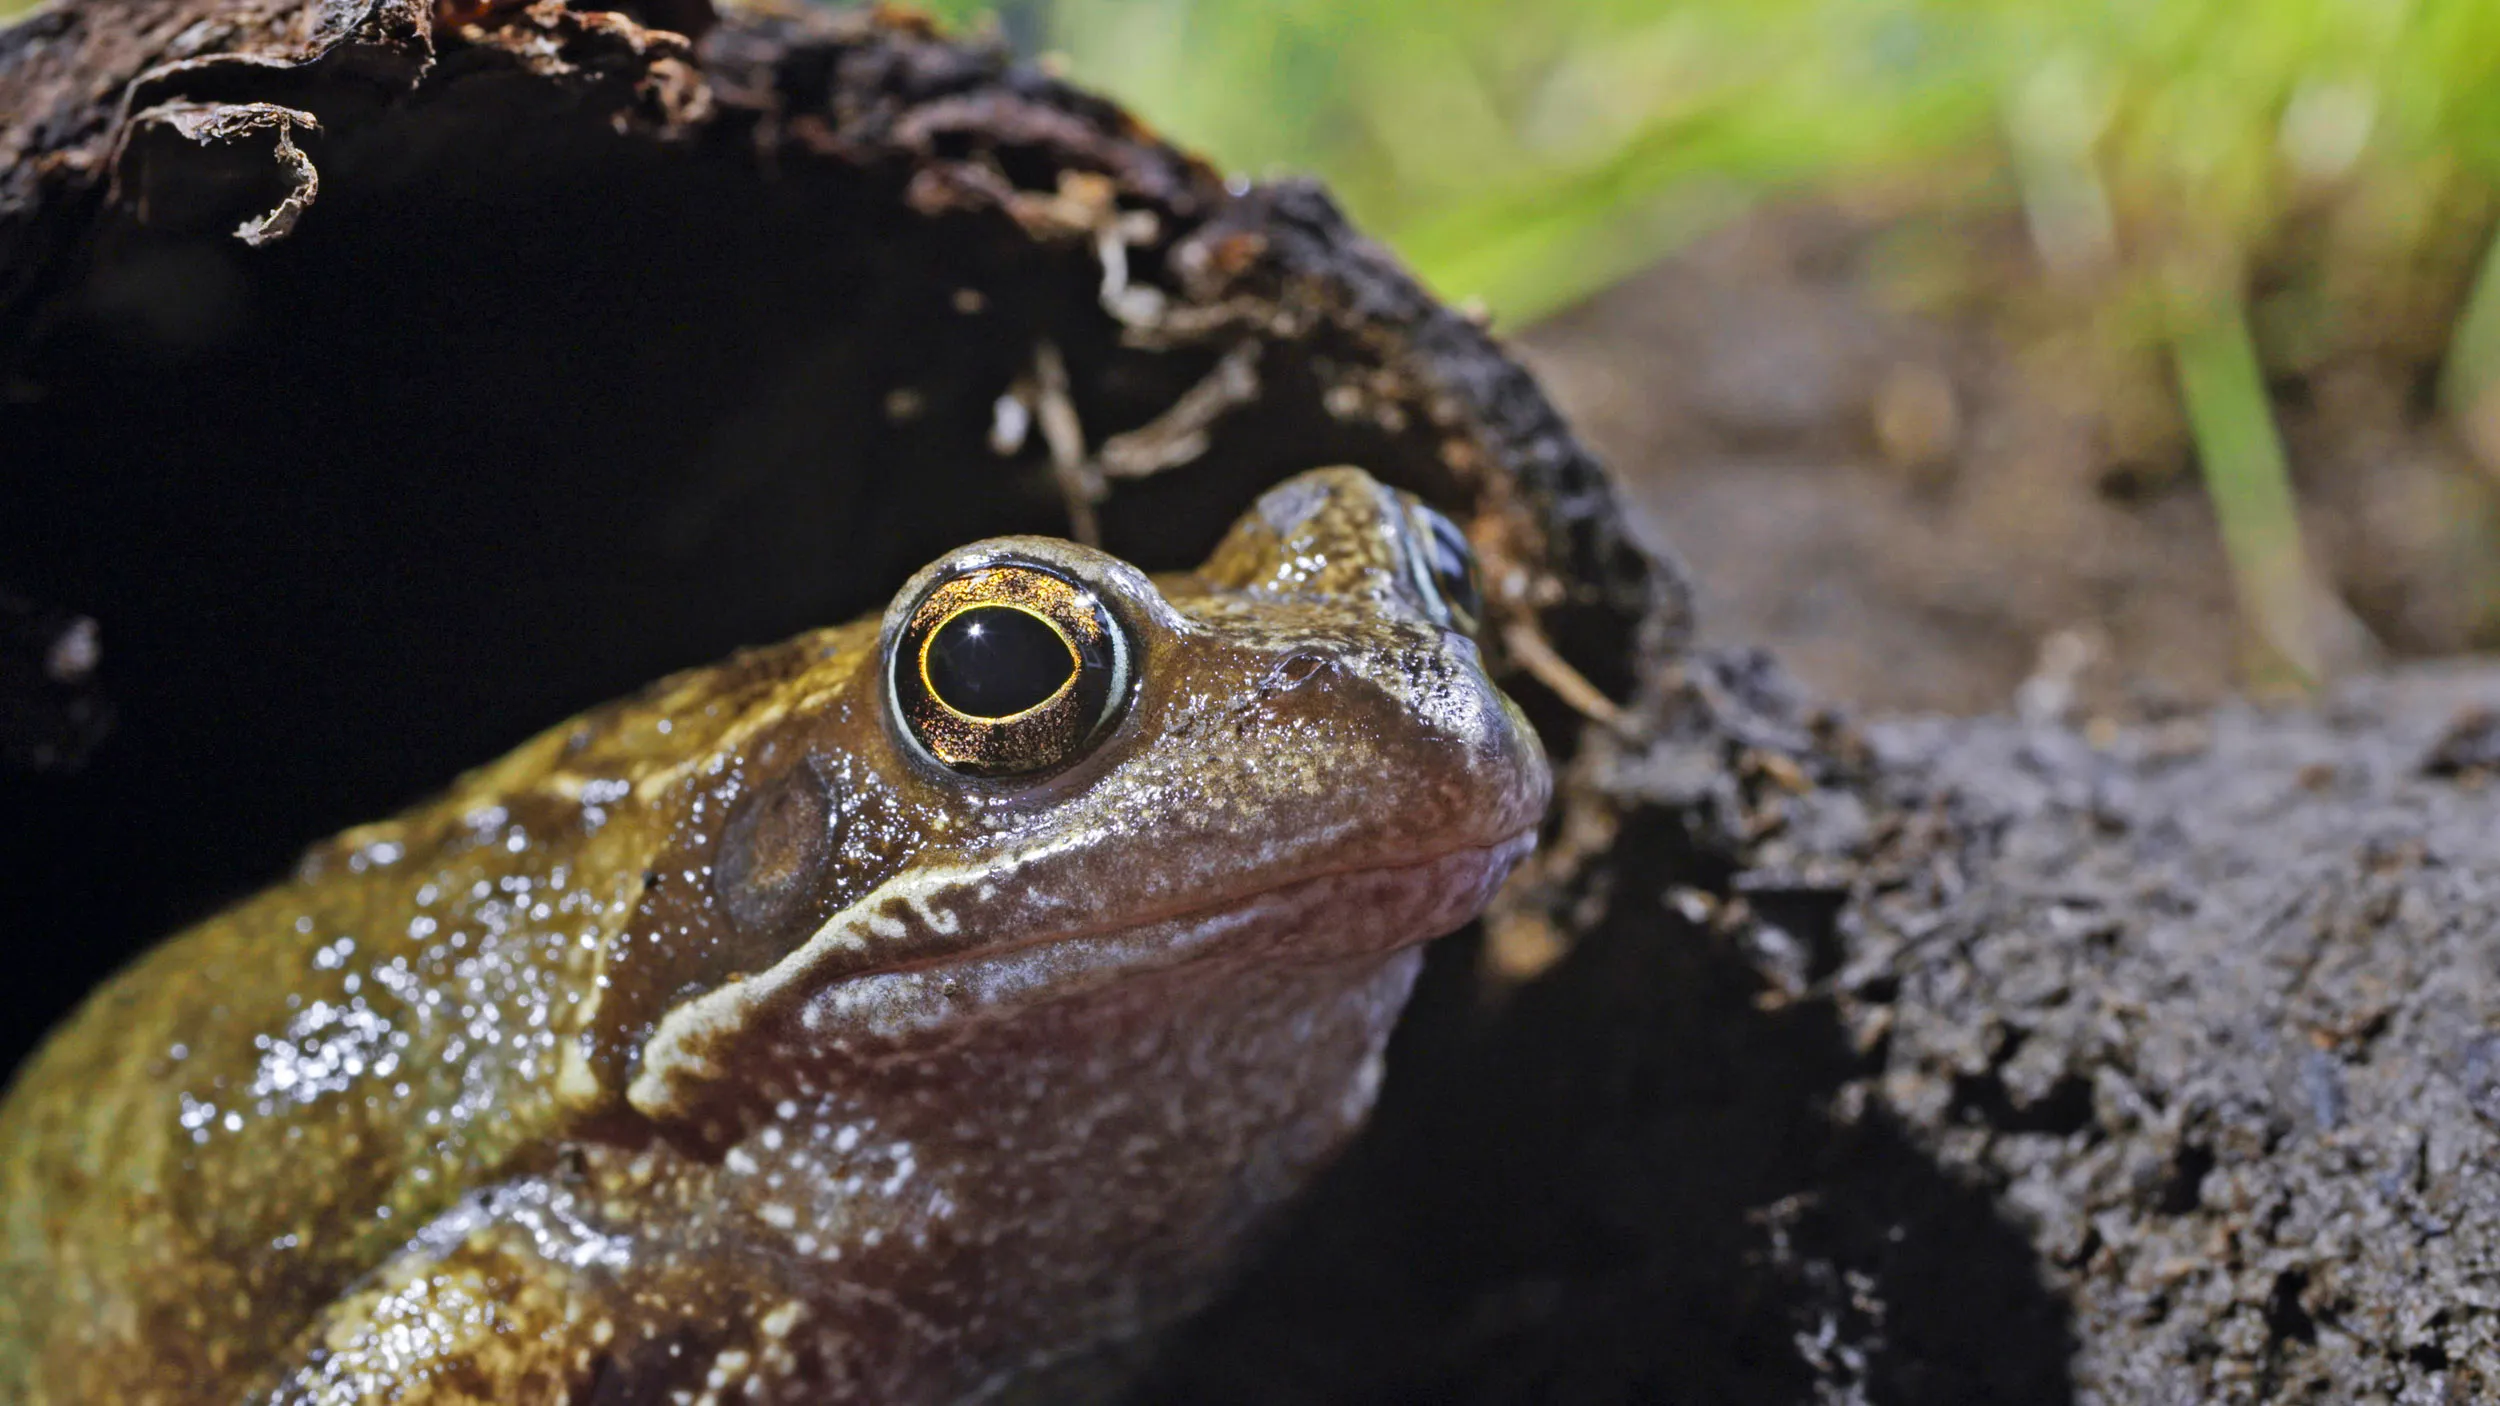 A lone Common Frog poking their head out of a log.